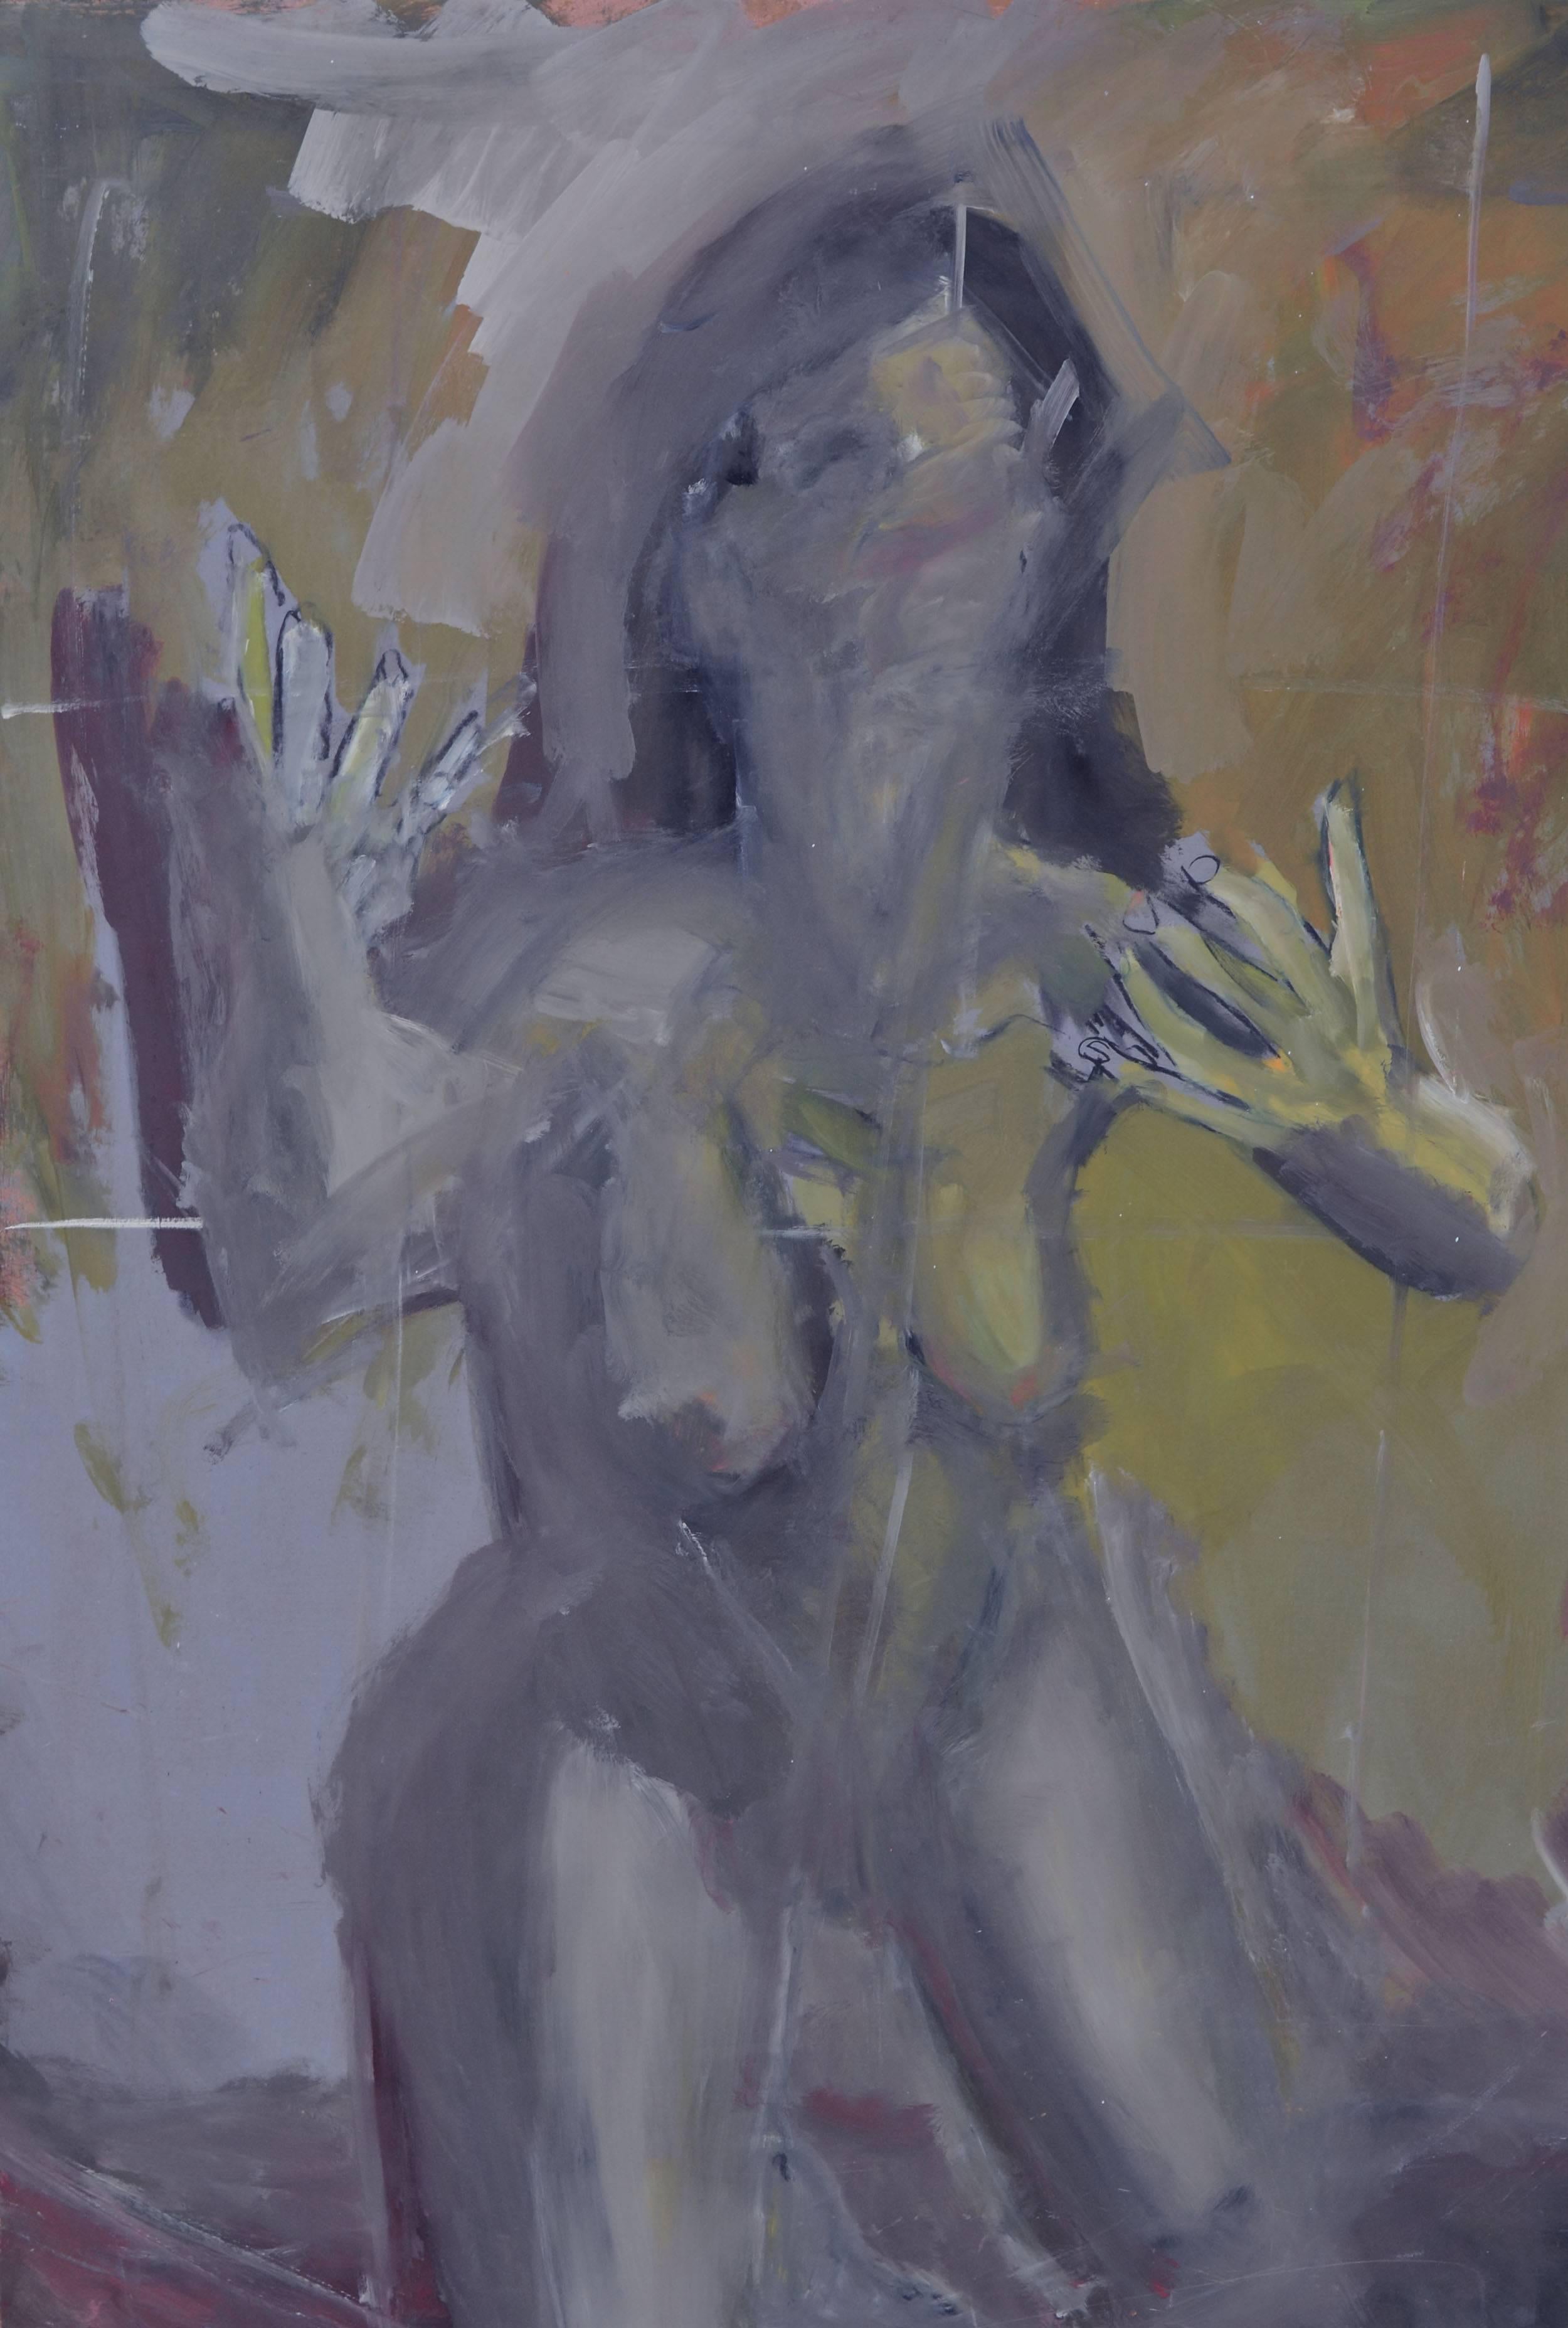 Female Nude in the Shadows - Figurative Abstract  - Painting by Daniel David Fuentes